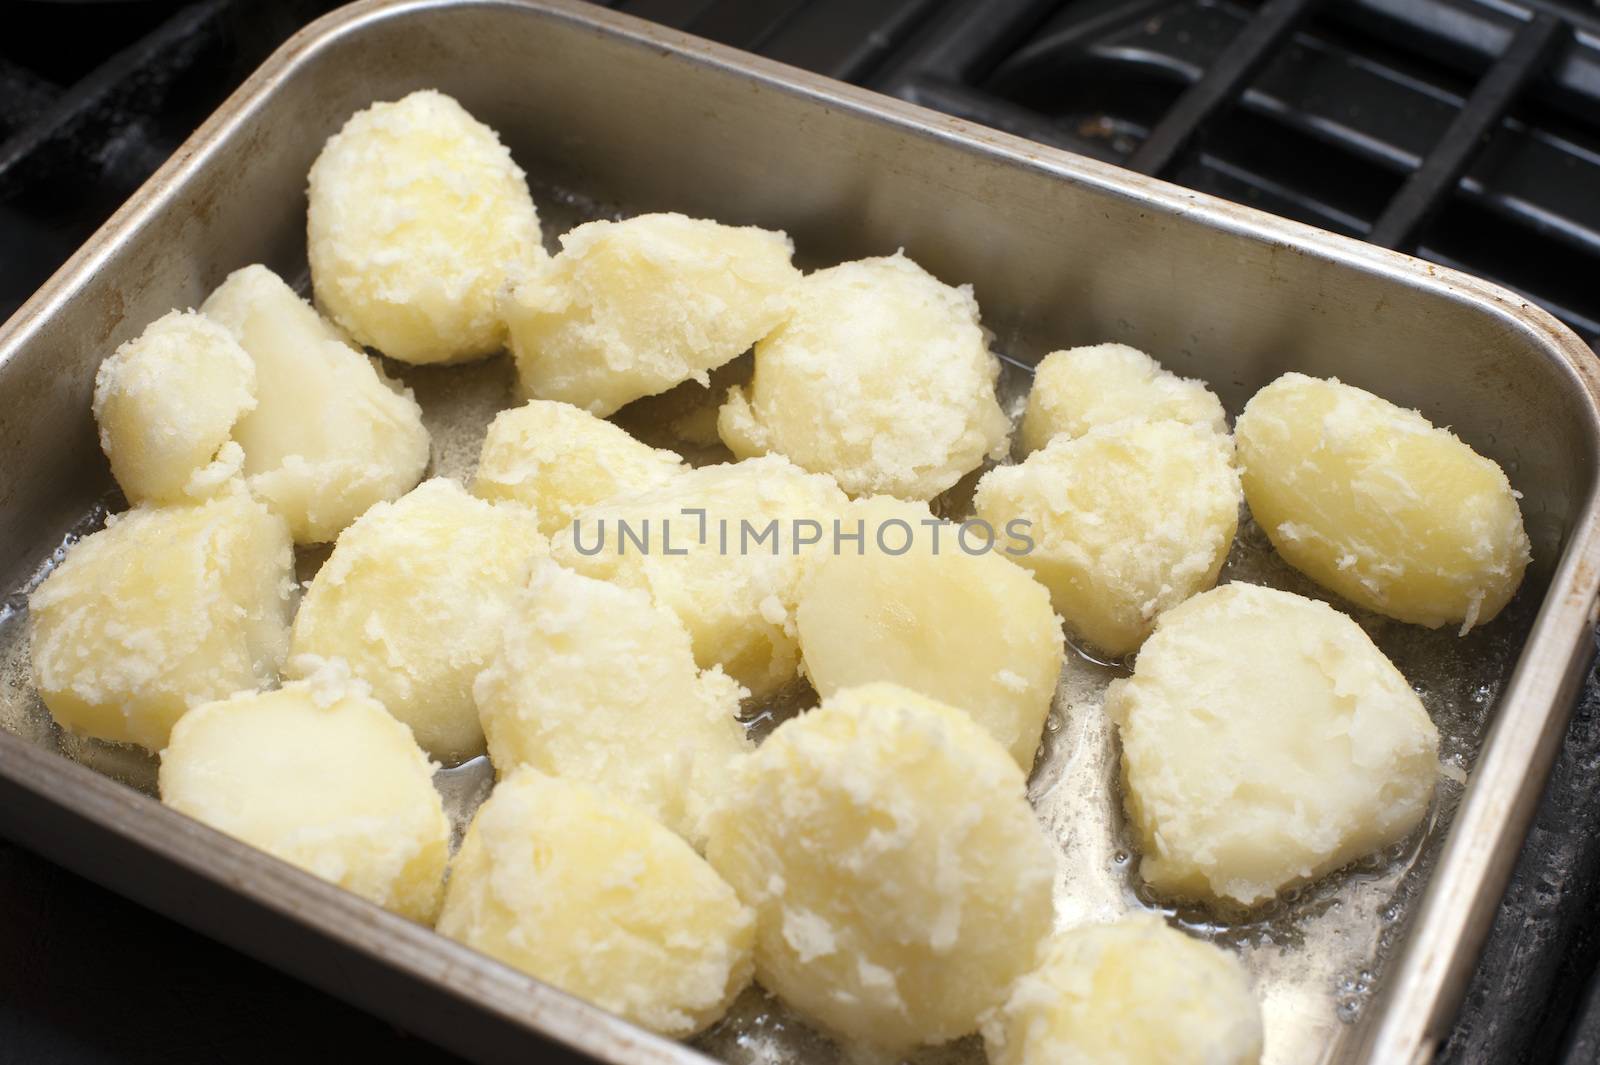 Preparing roast potatoes by par boiling them and placing them in an oven dish with oil to roast and crisp up